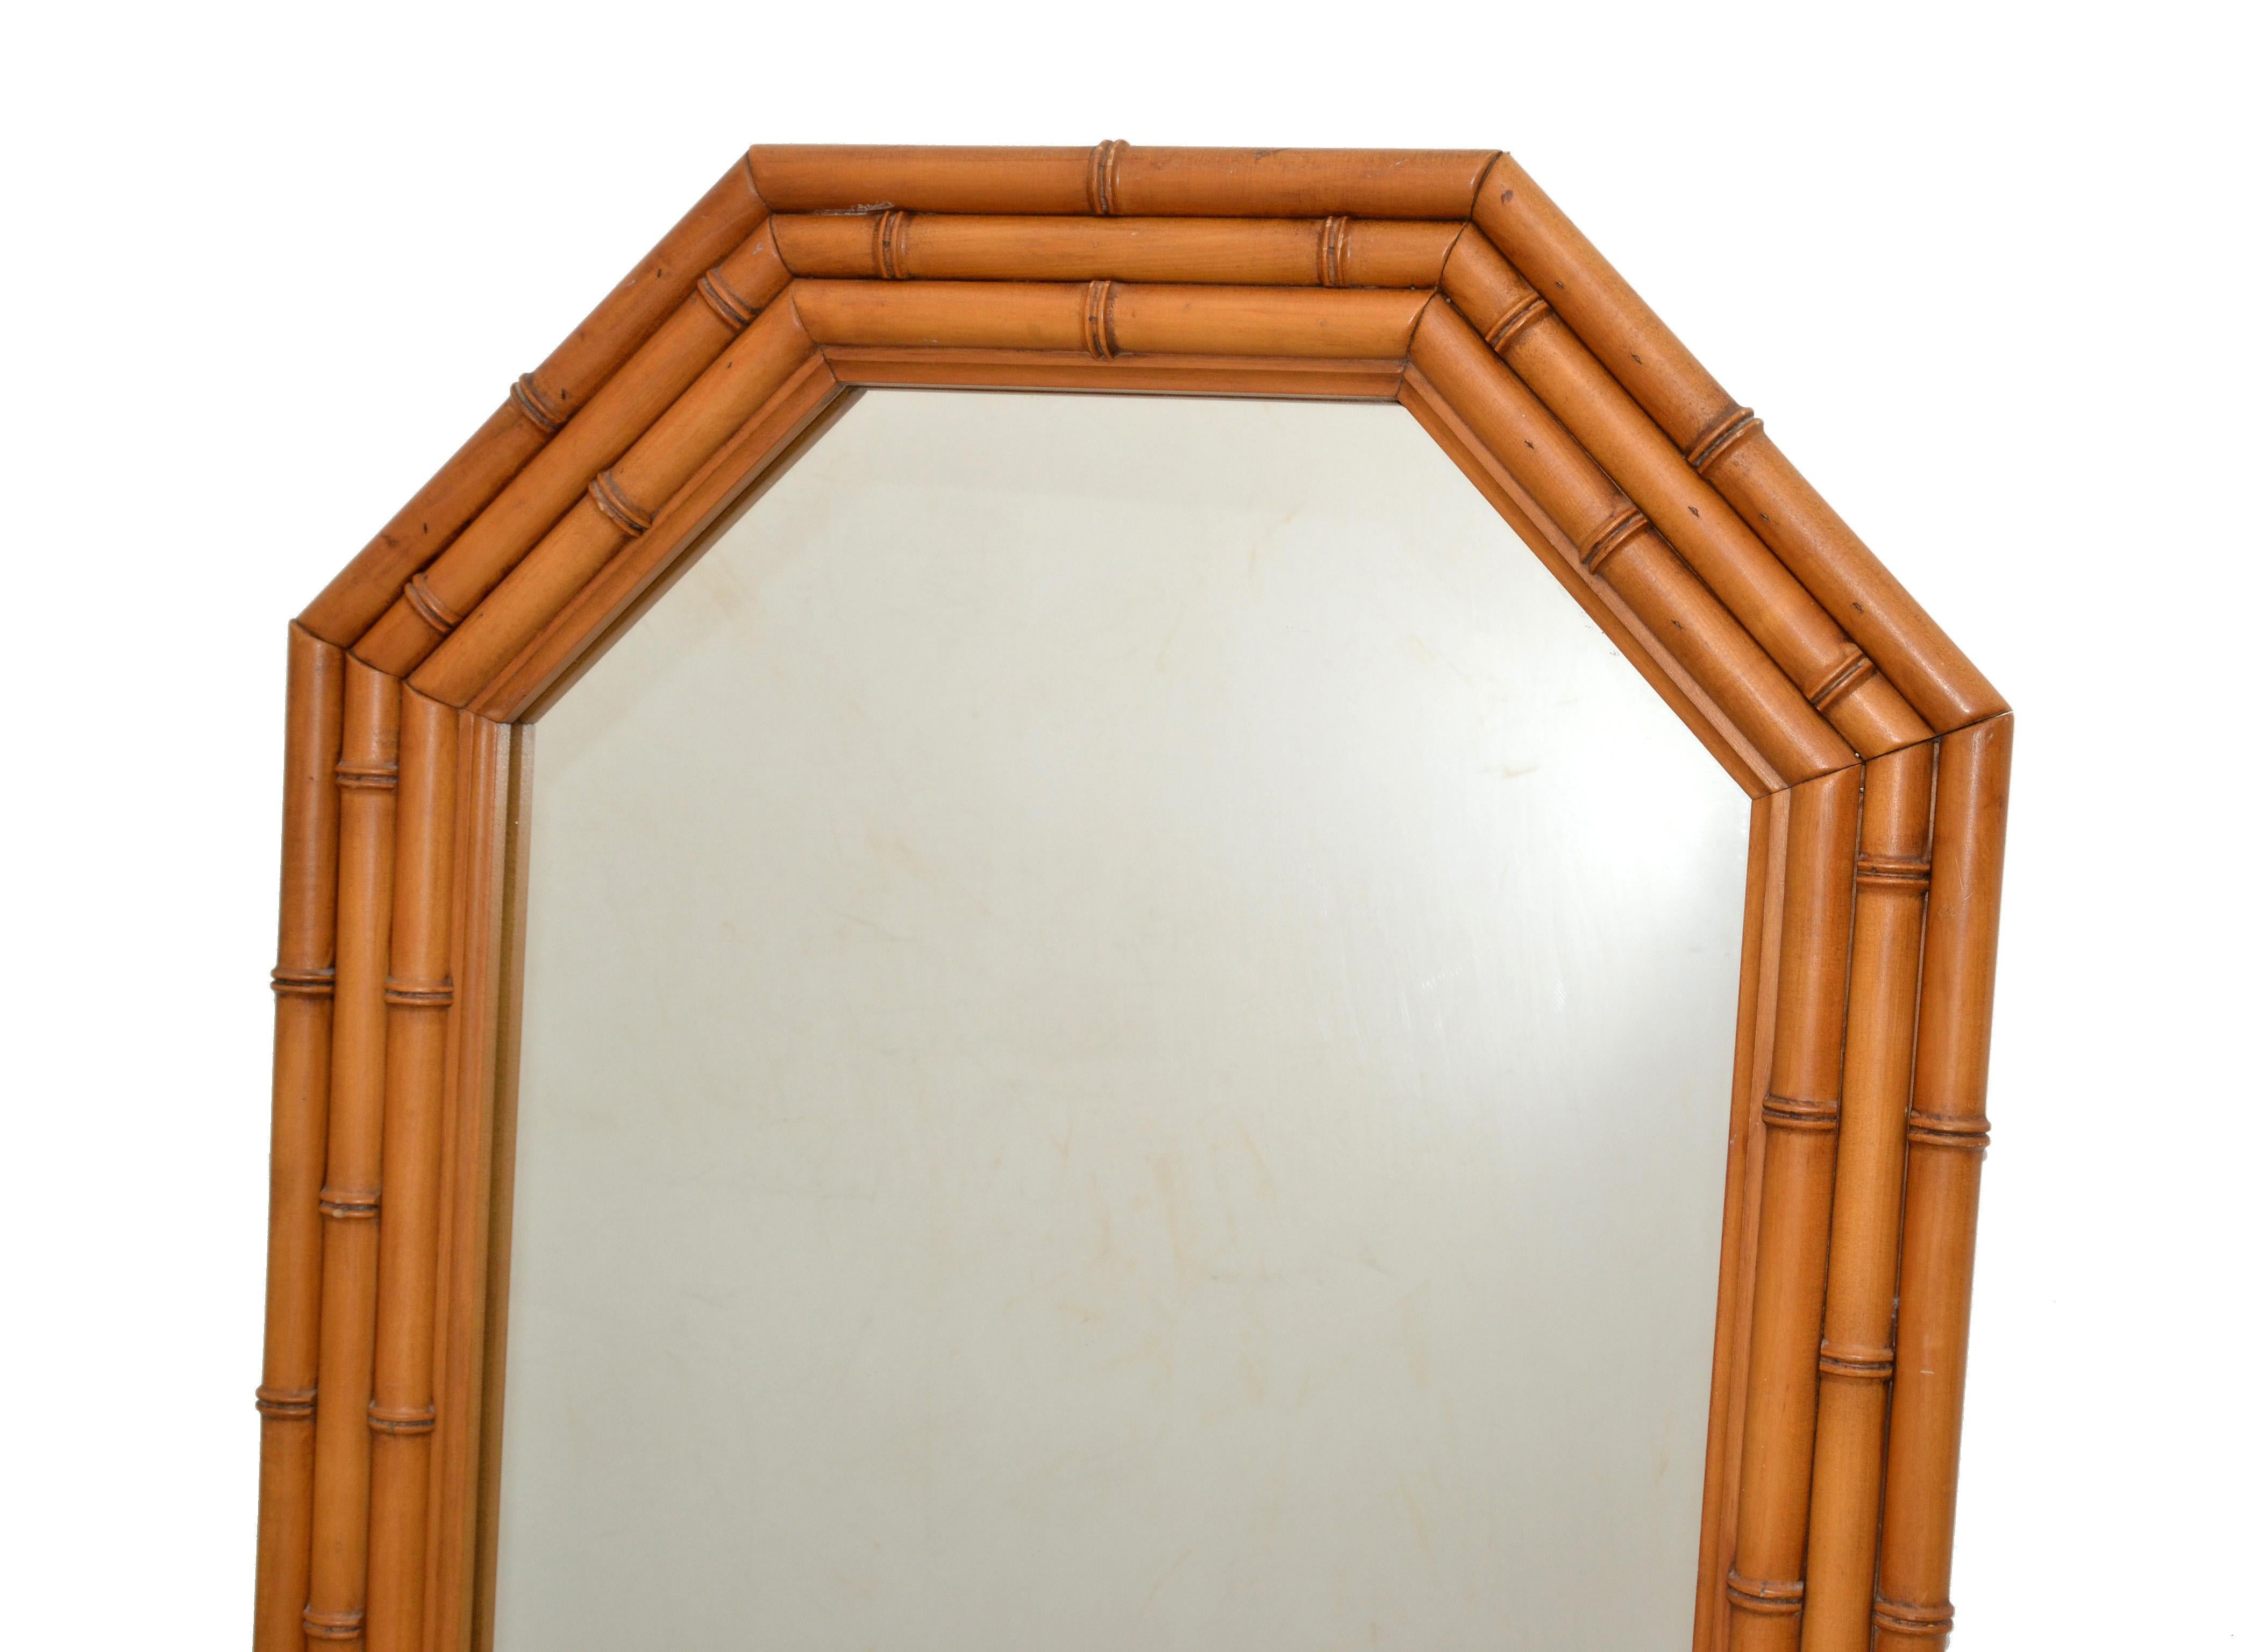 Octagonal Bohemian Chic Bamboo Wall Mirror Wood Backing Mid-Century Modern 50s For Sale 2